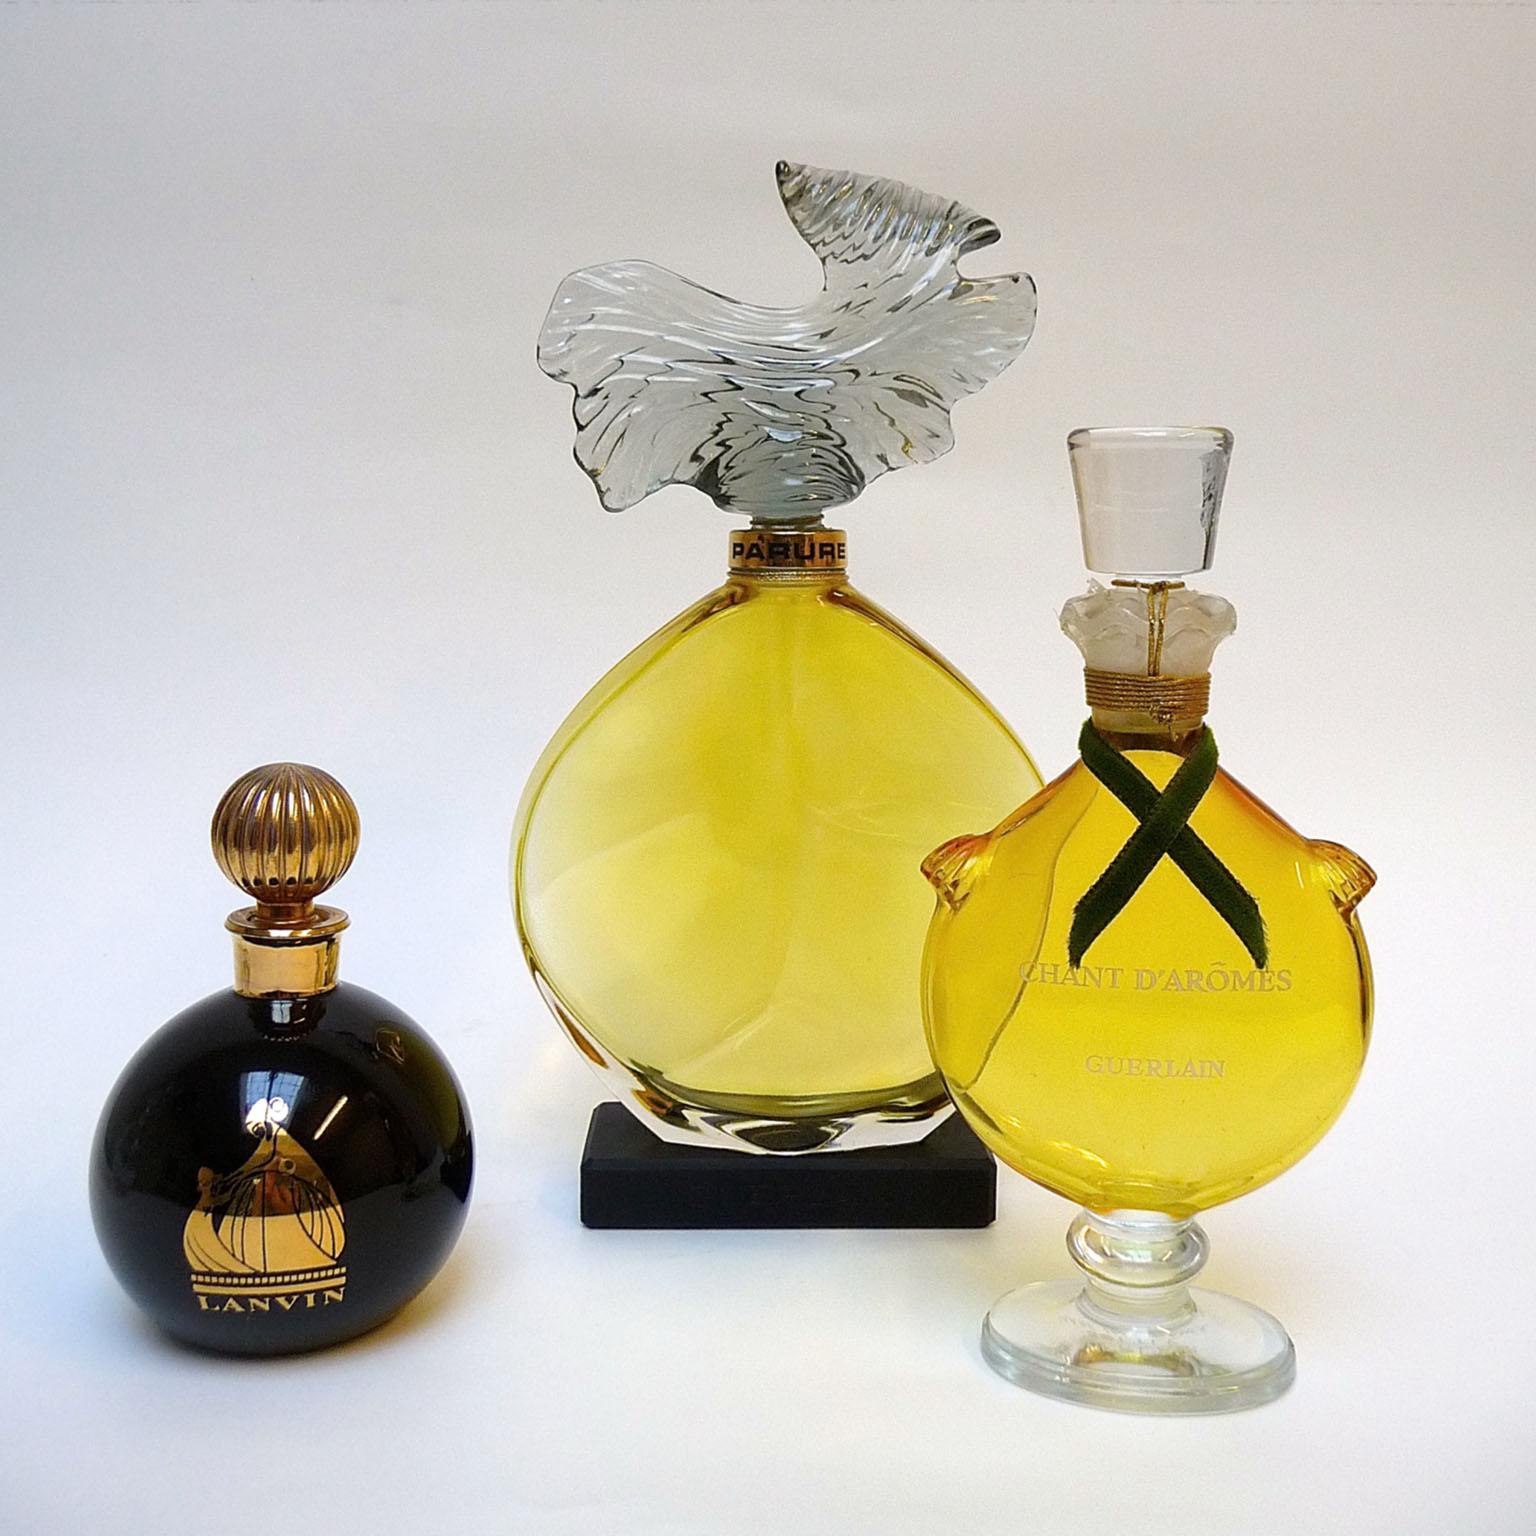 Factice perfume Guerlain Lanvin store display bottles
Three vintage store display fragrance bottles / Factice perfume bottles, all in excellent condition.
From left to right:
- Arpege Lanvin H 10 cm (3.9 in.), black, ball-shaped bottle, known as